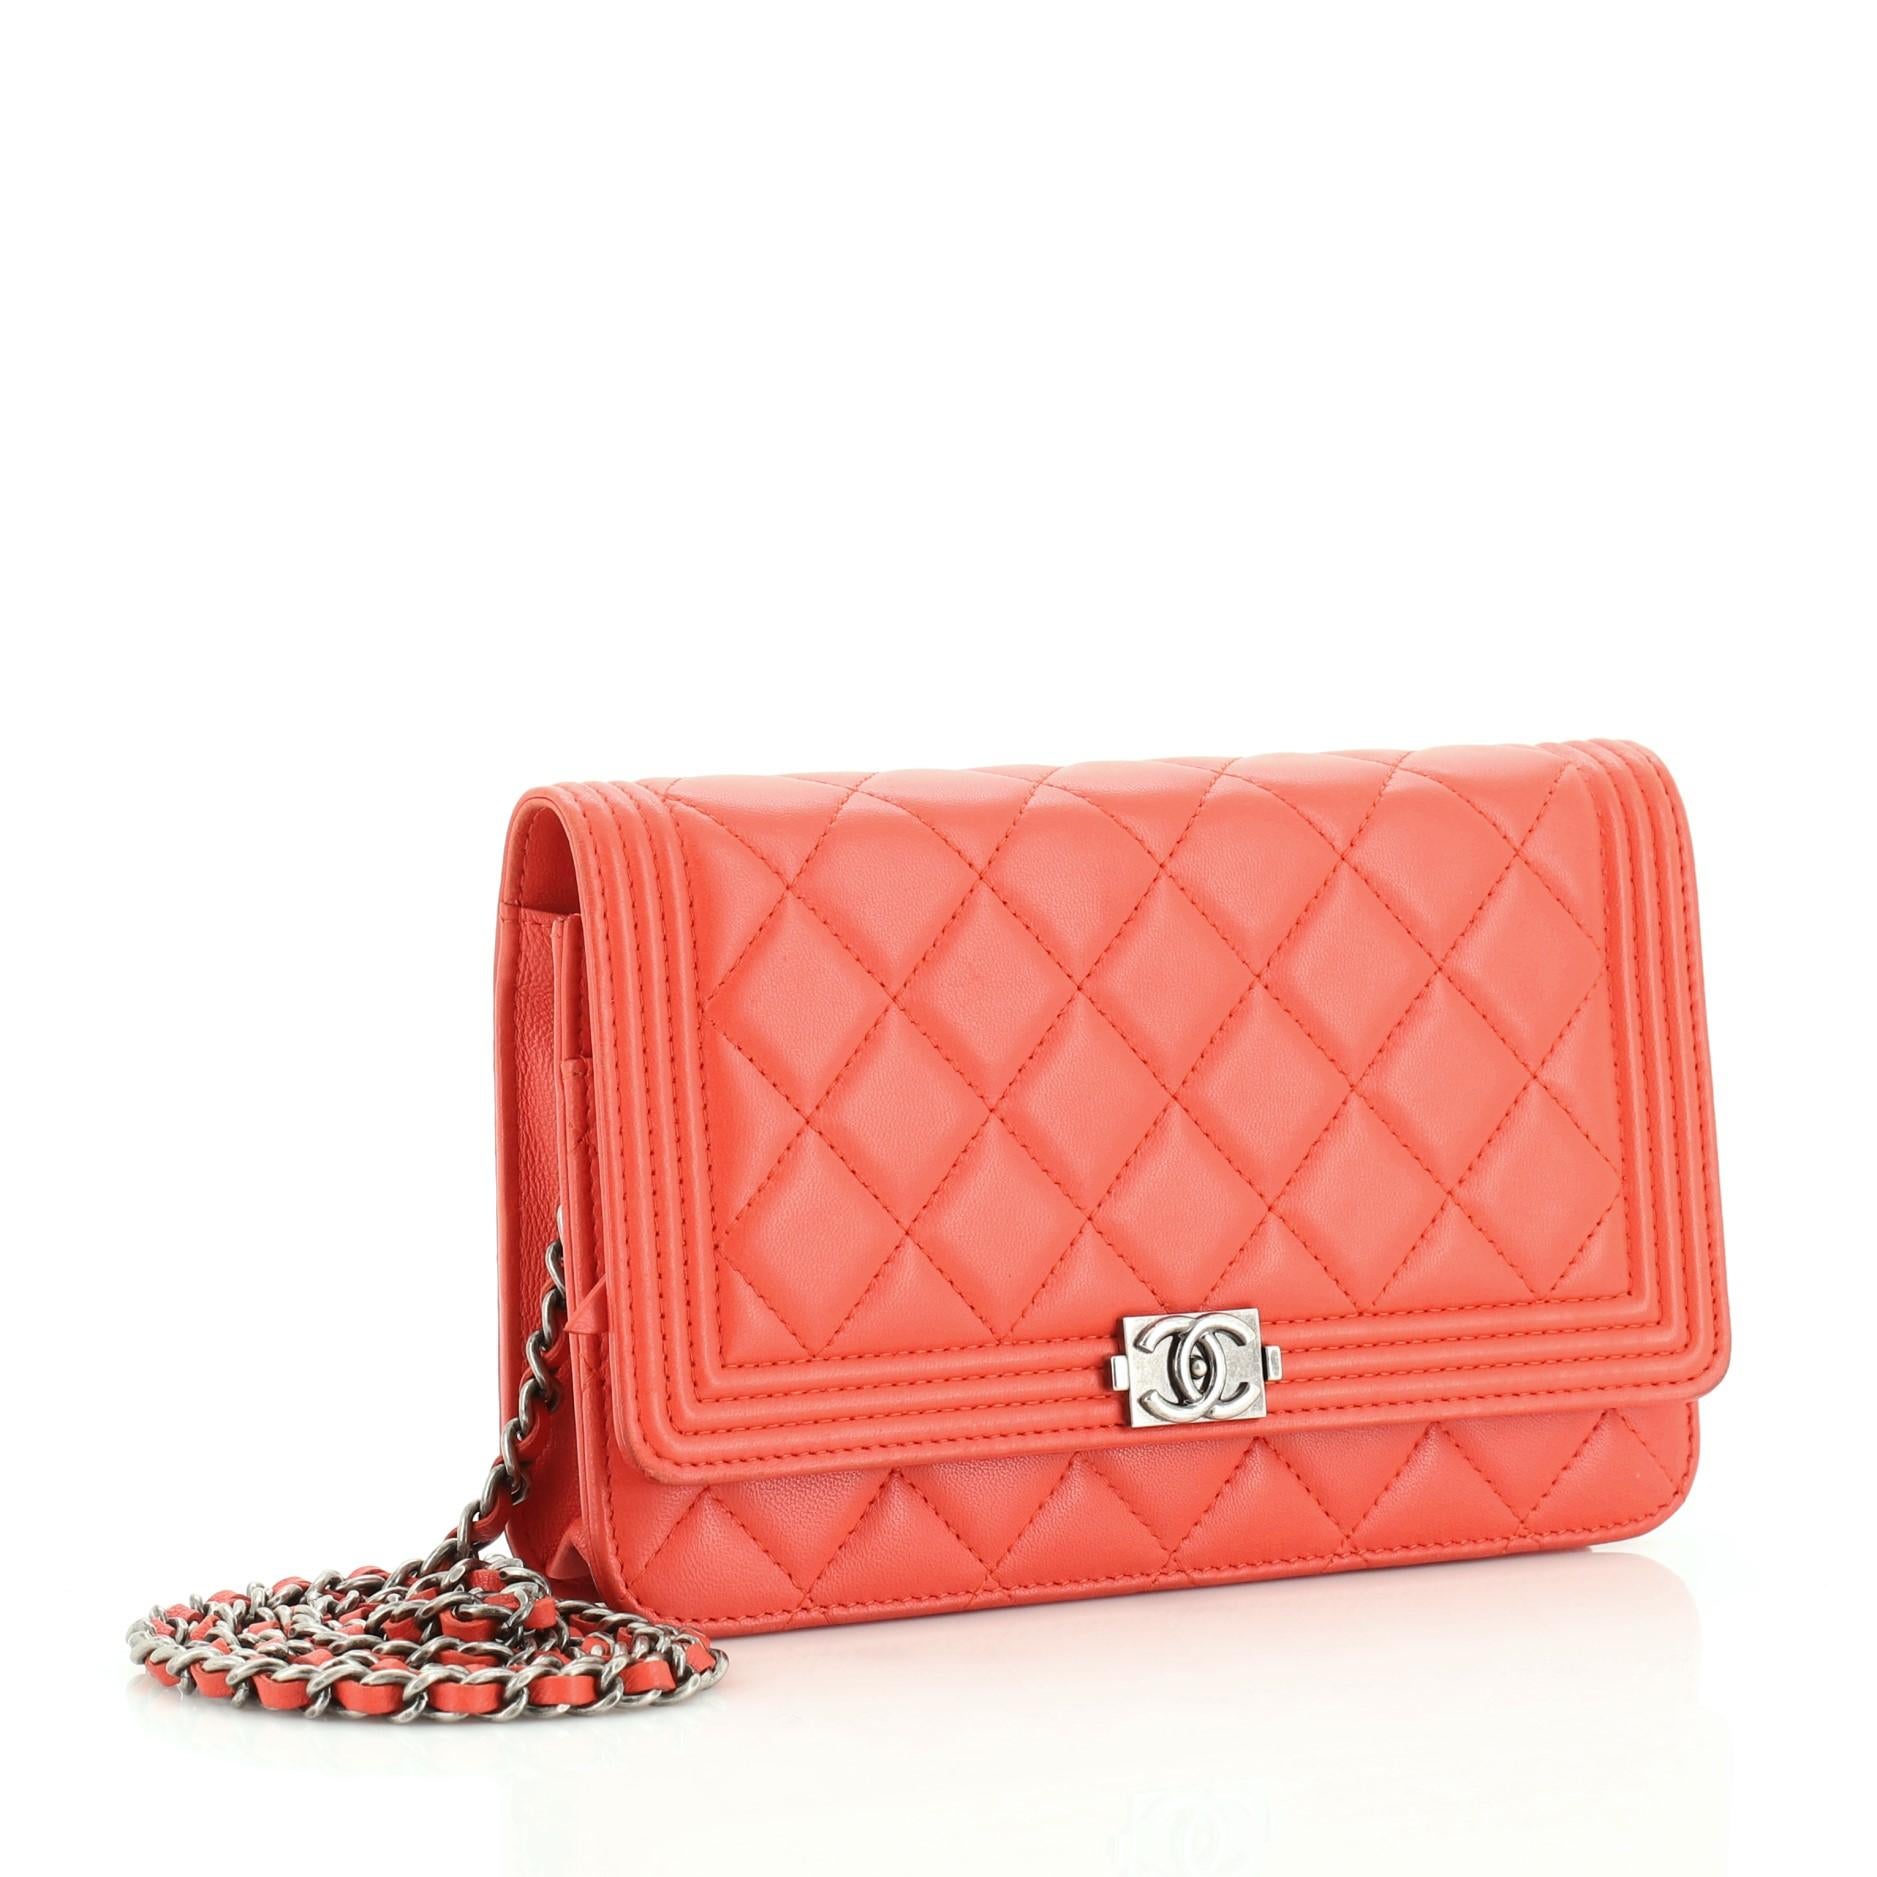 This Chanel Boy Wallet on Chain Quilted Lambskin, crafted from red quilted lambskin leather, features woven-in leather chain strap, Chanel boy insignia, and aged silver-tone hardware. Its snap button closure opens to a red fabric interior with side